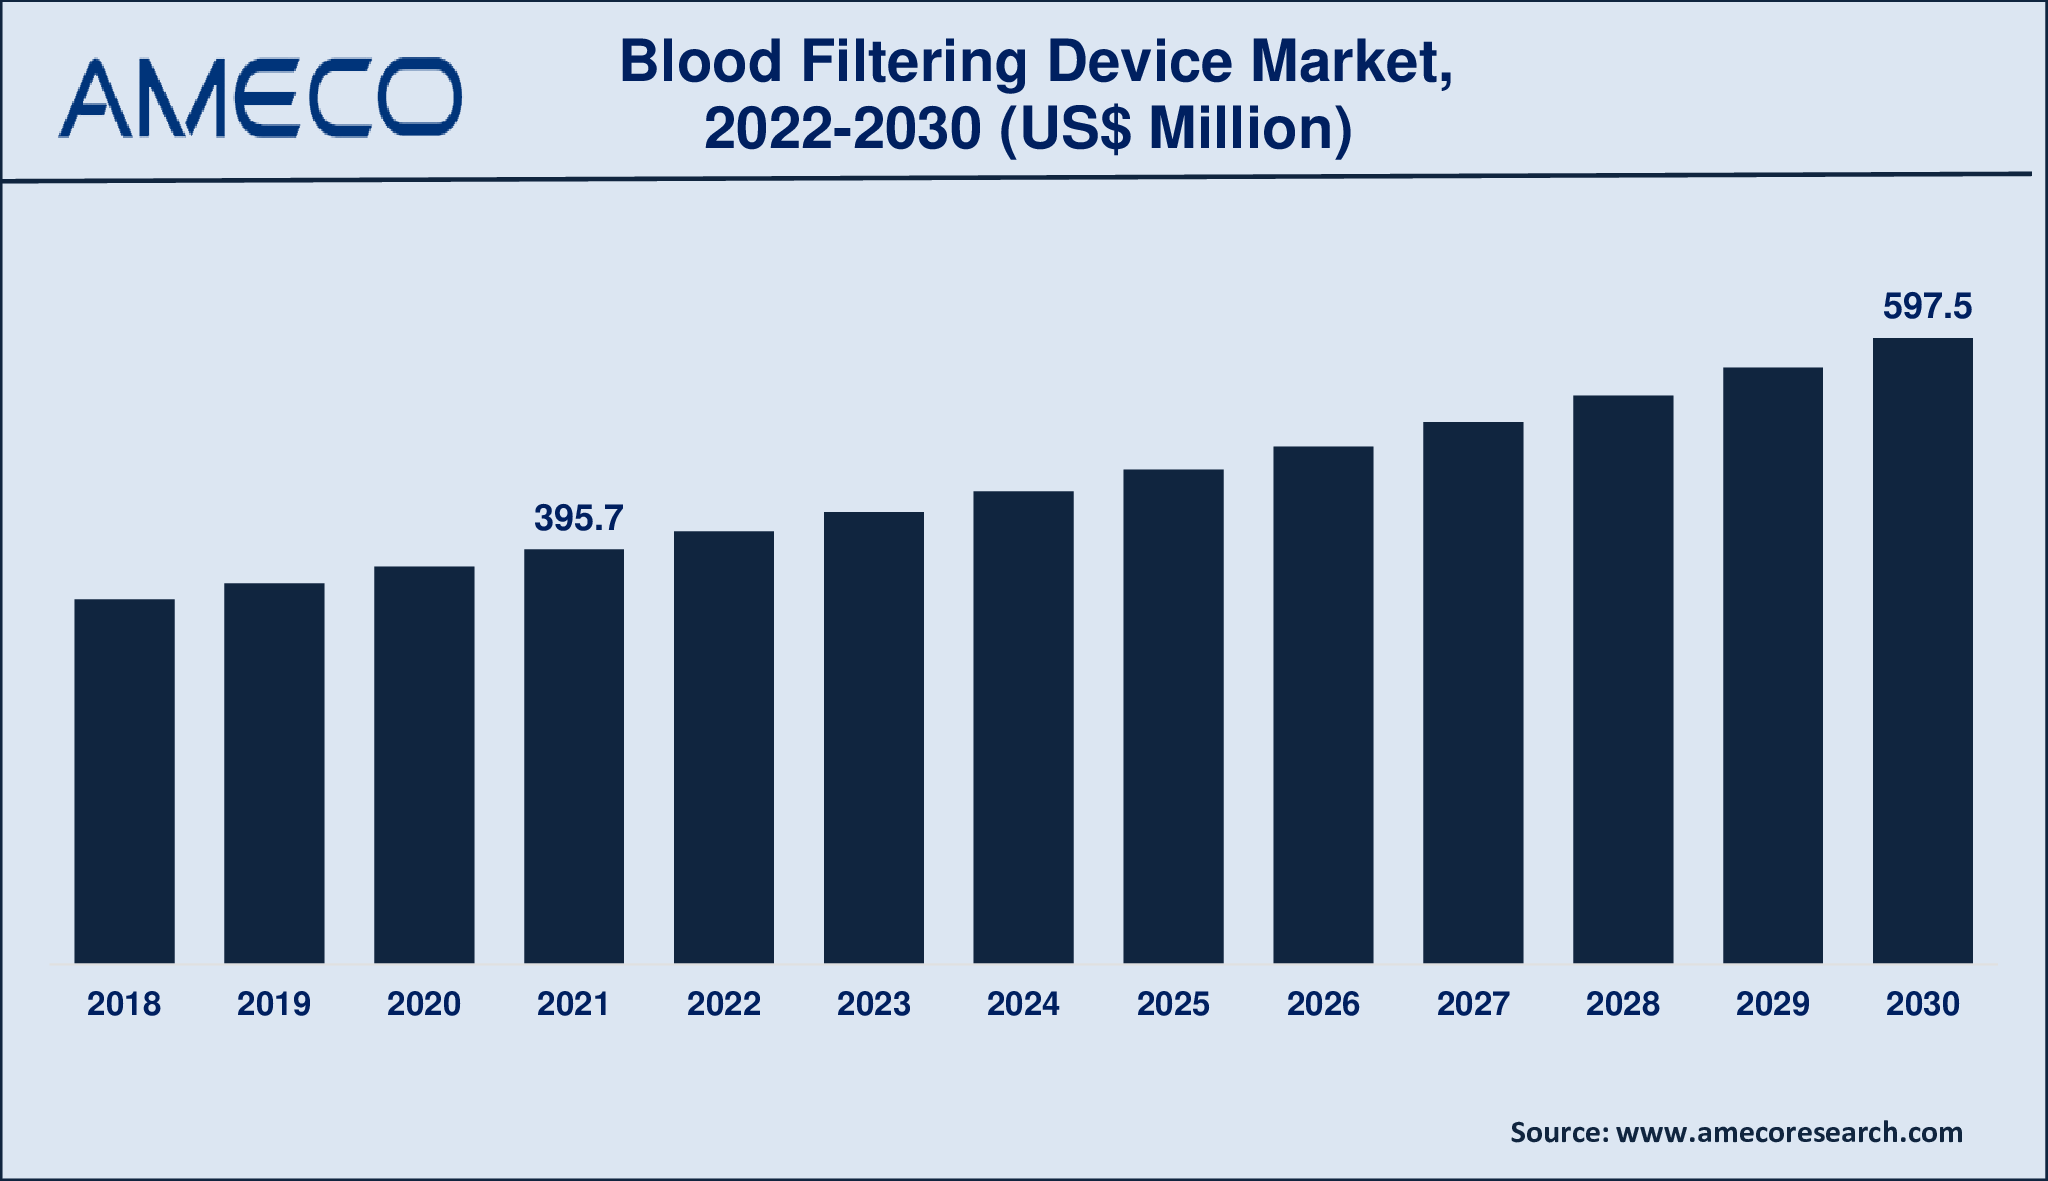 Blood Filtering Device Market Size, Share, Growth, Trends, and Forecast 2022-2030